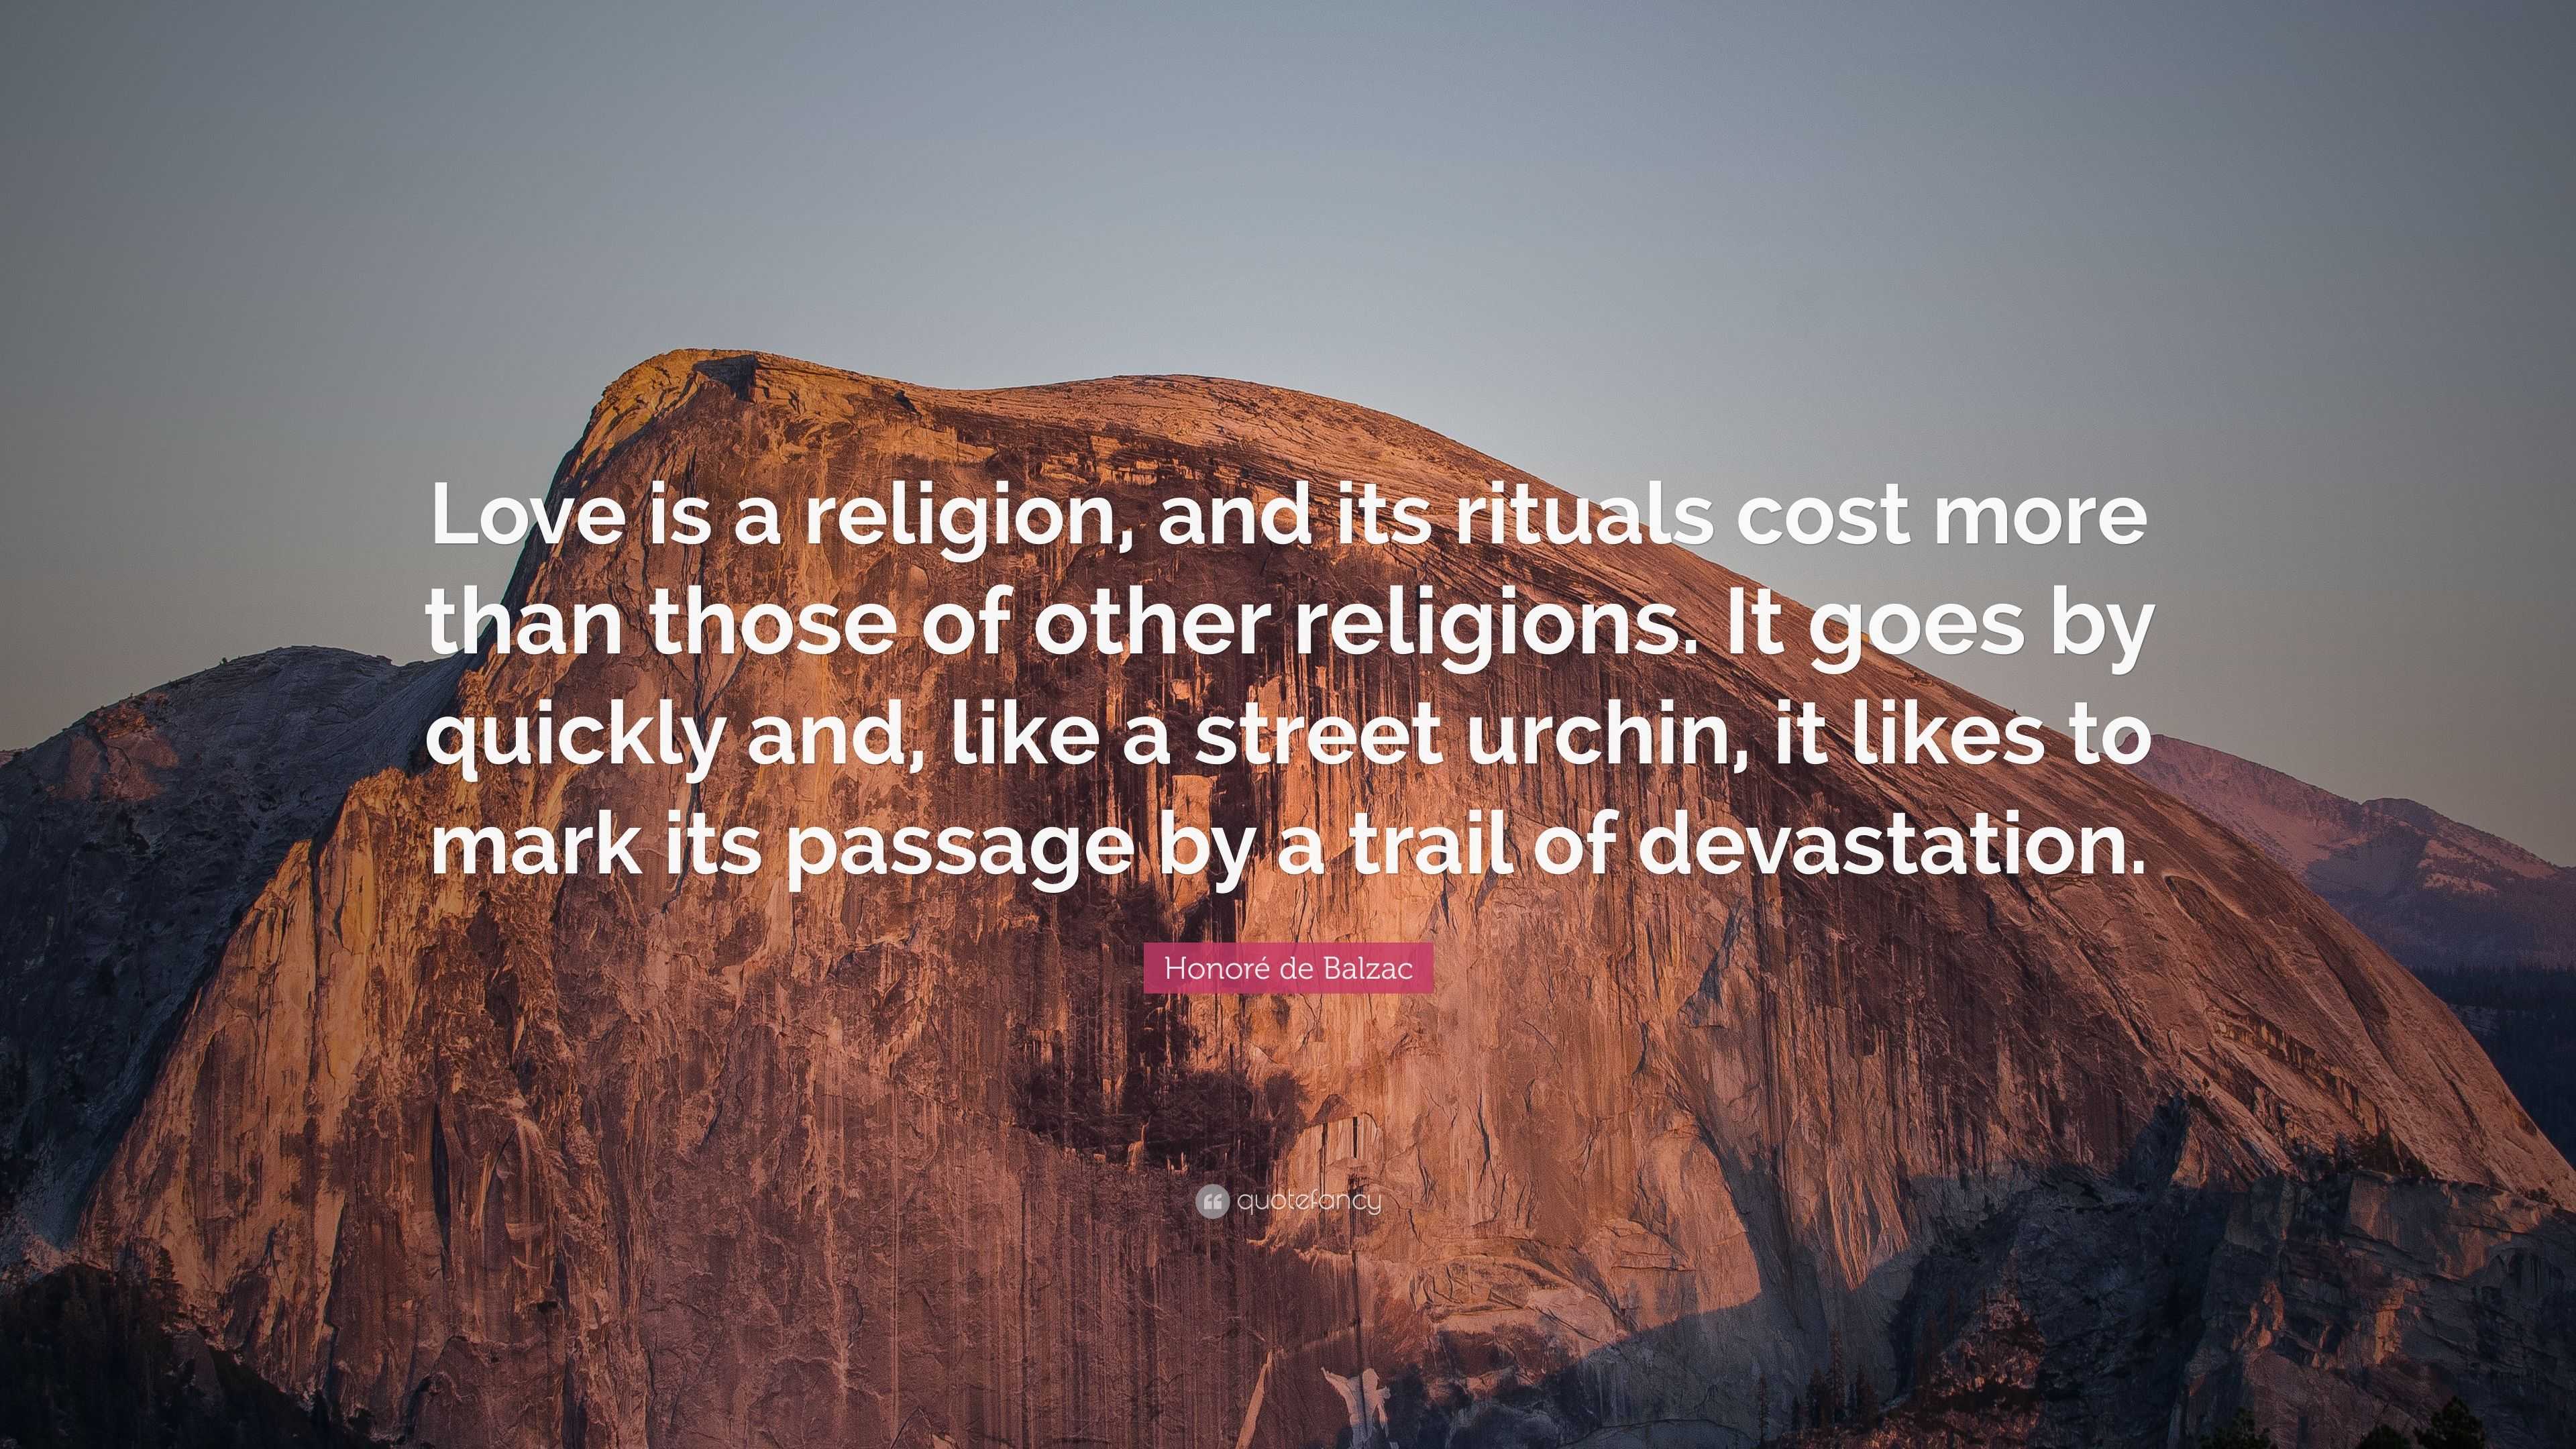 Honoré de Balzac Quote: “Love is a religion, and its rituals cost more ...